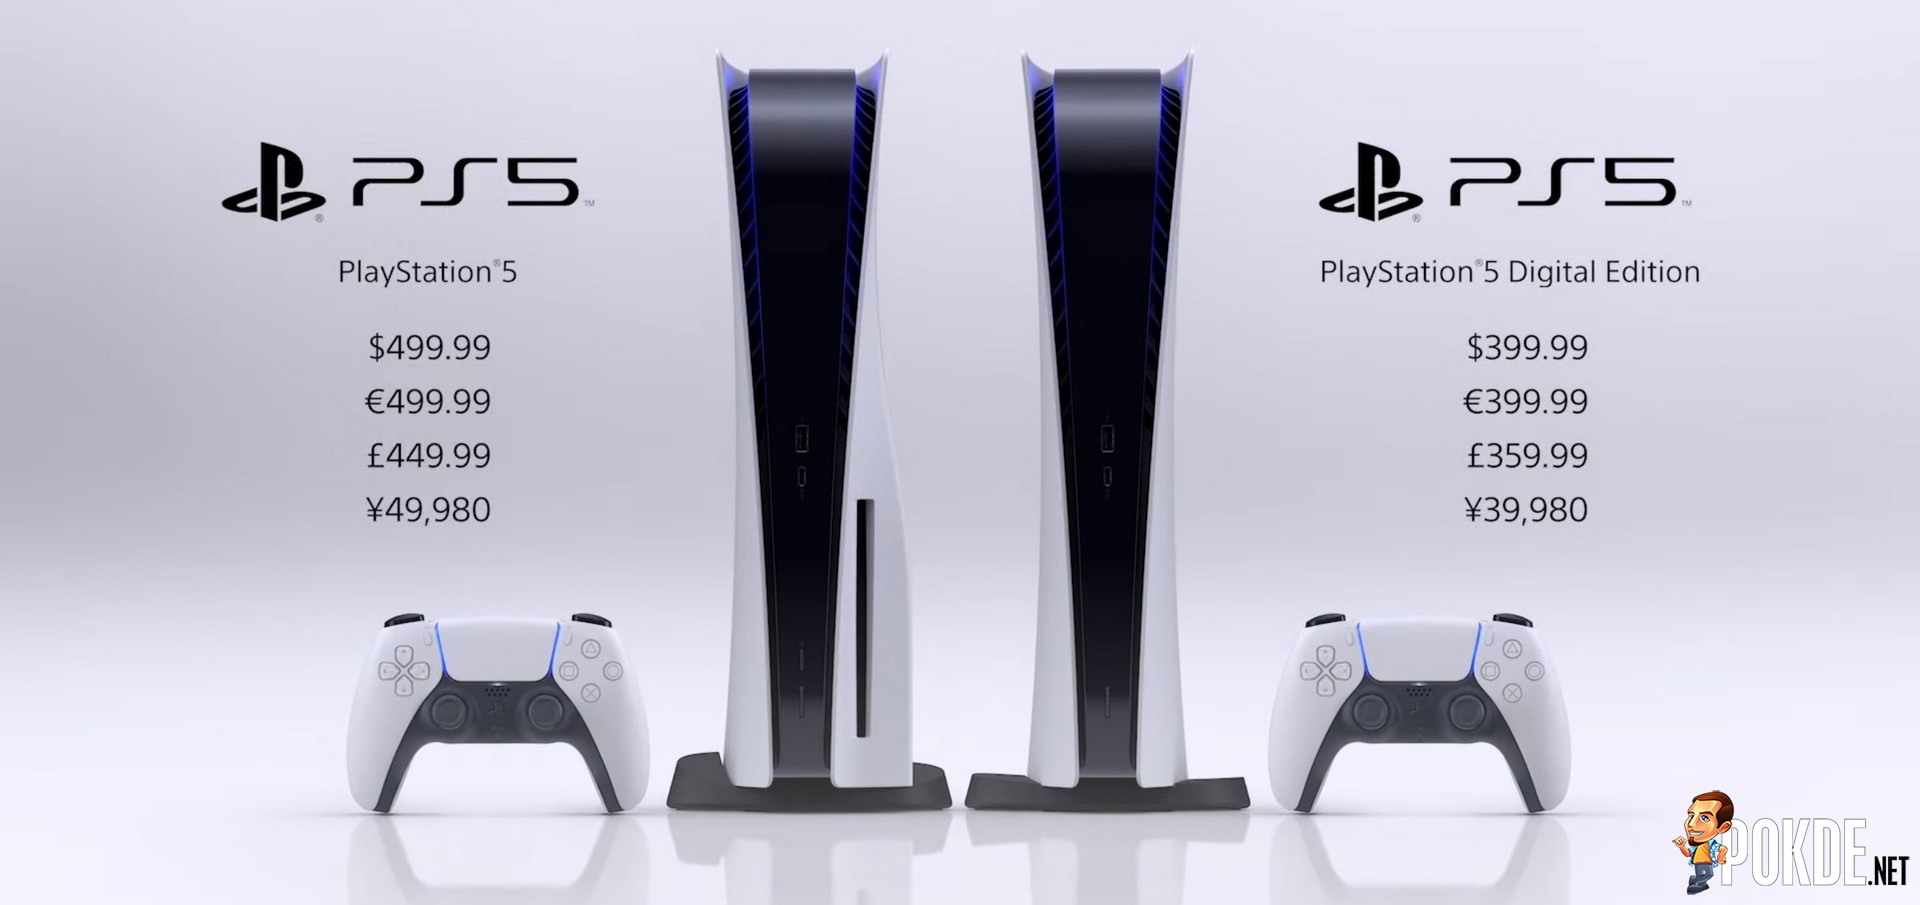 will ps5 support ps3 games